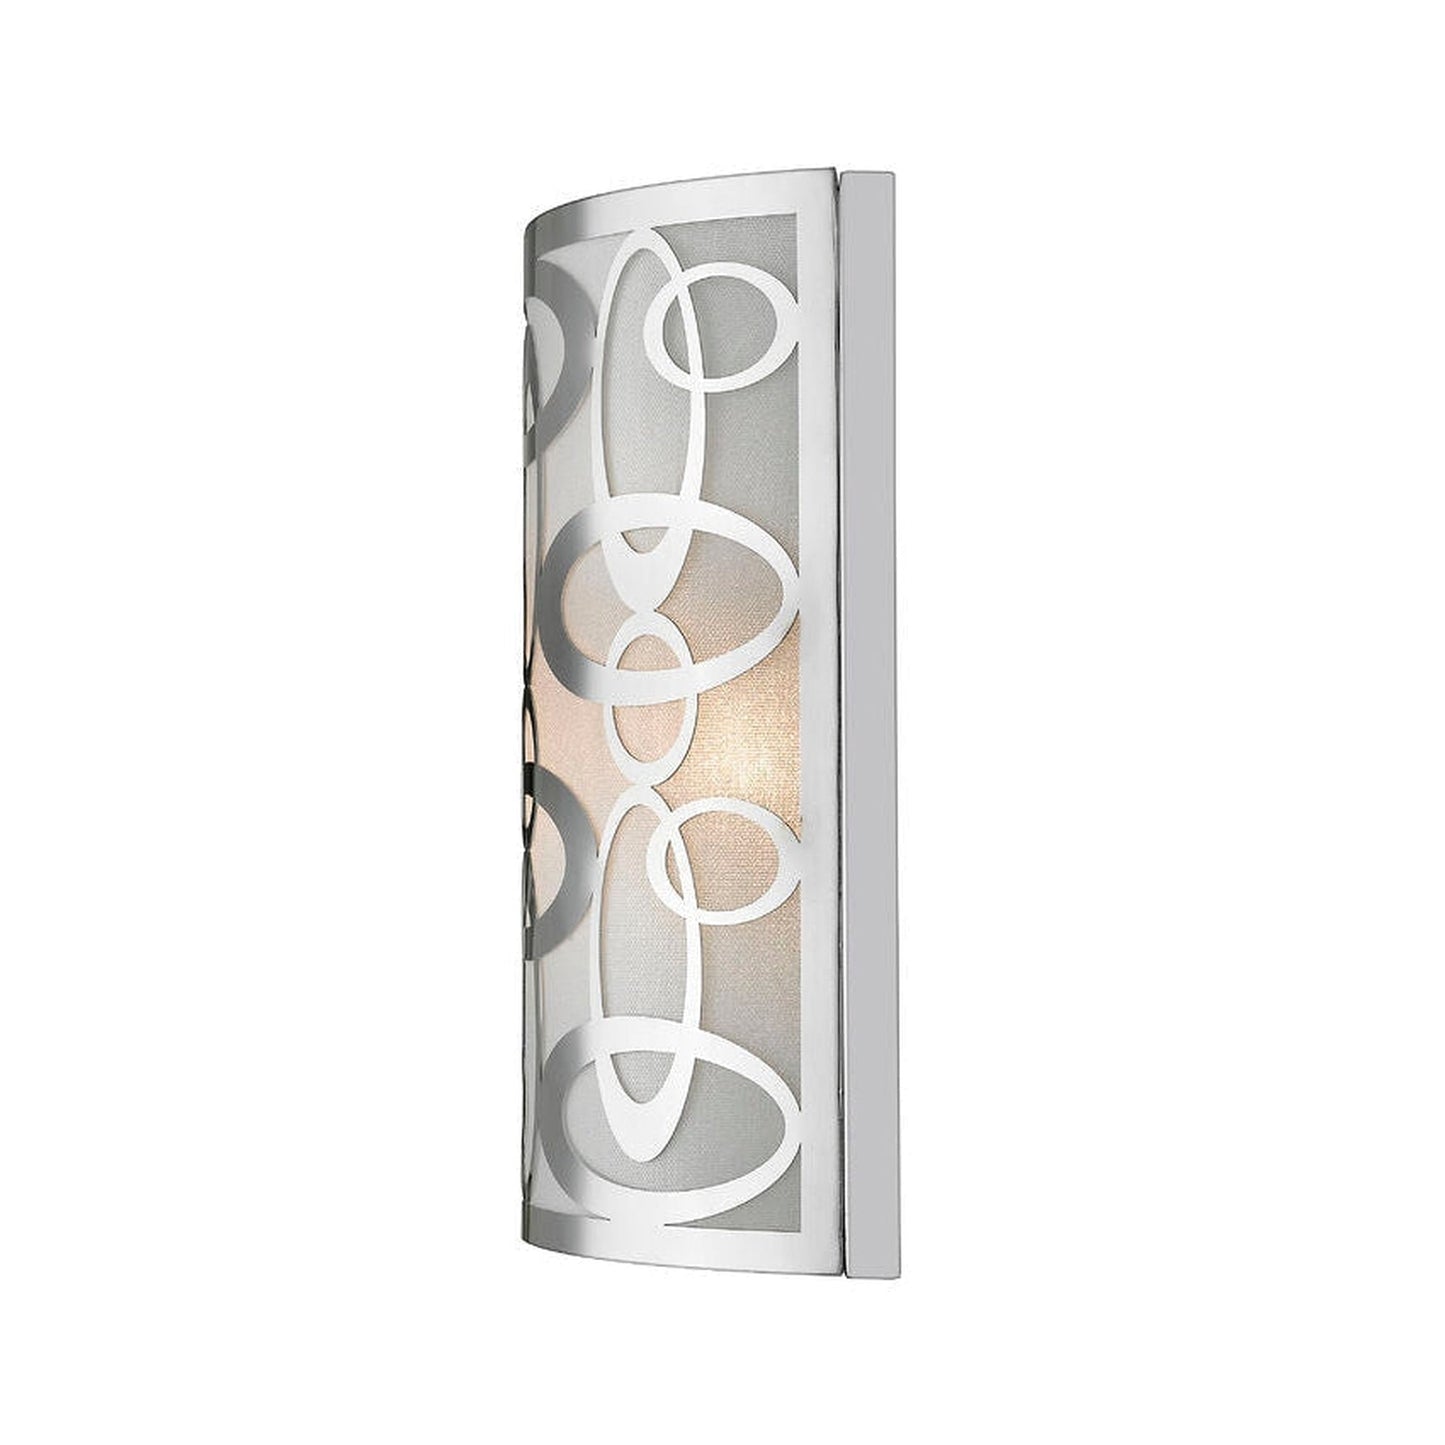 Z-Lite Opal 9" 2-Light Chrome Wall Sconce With White Fabric Shade